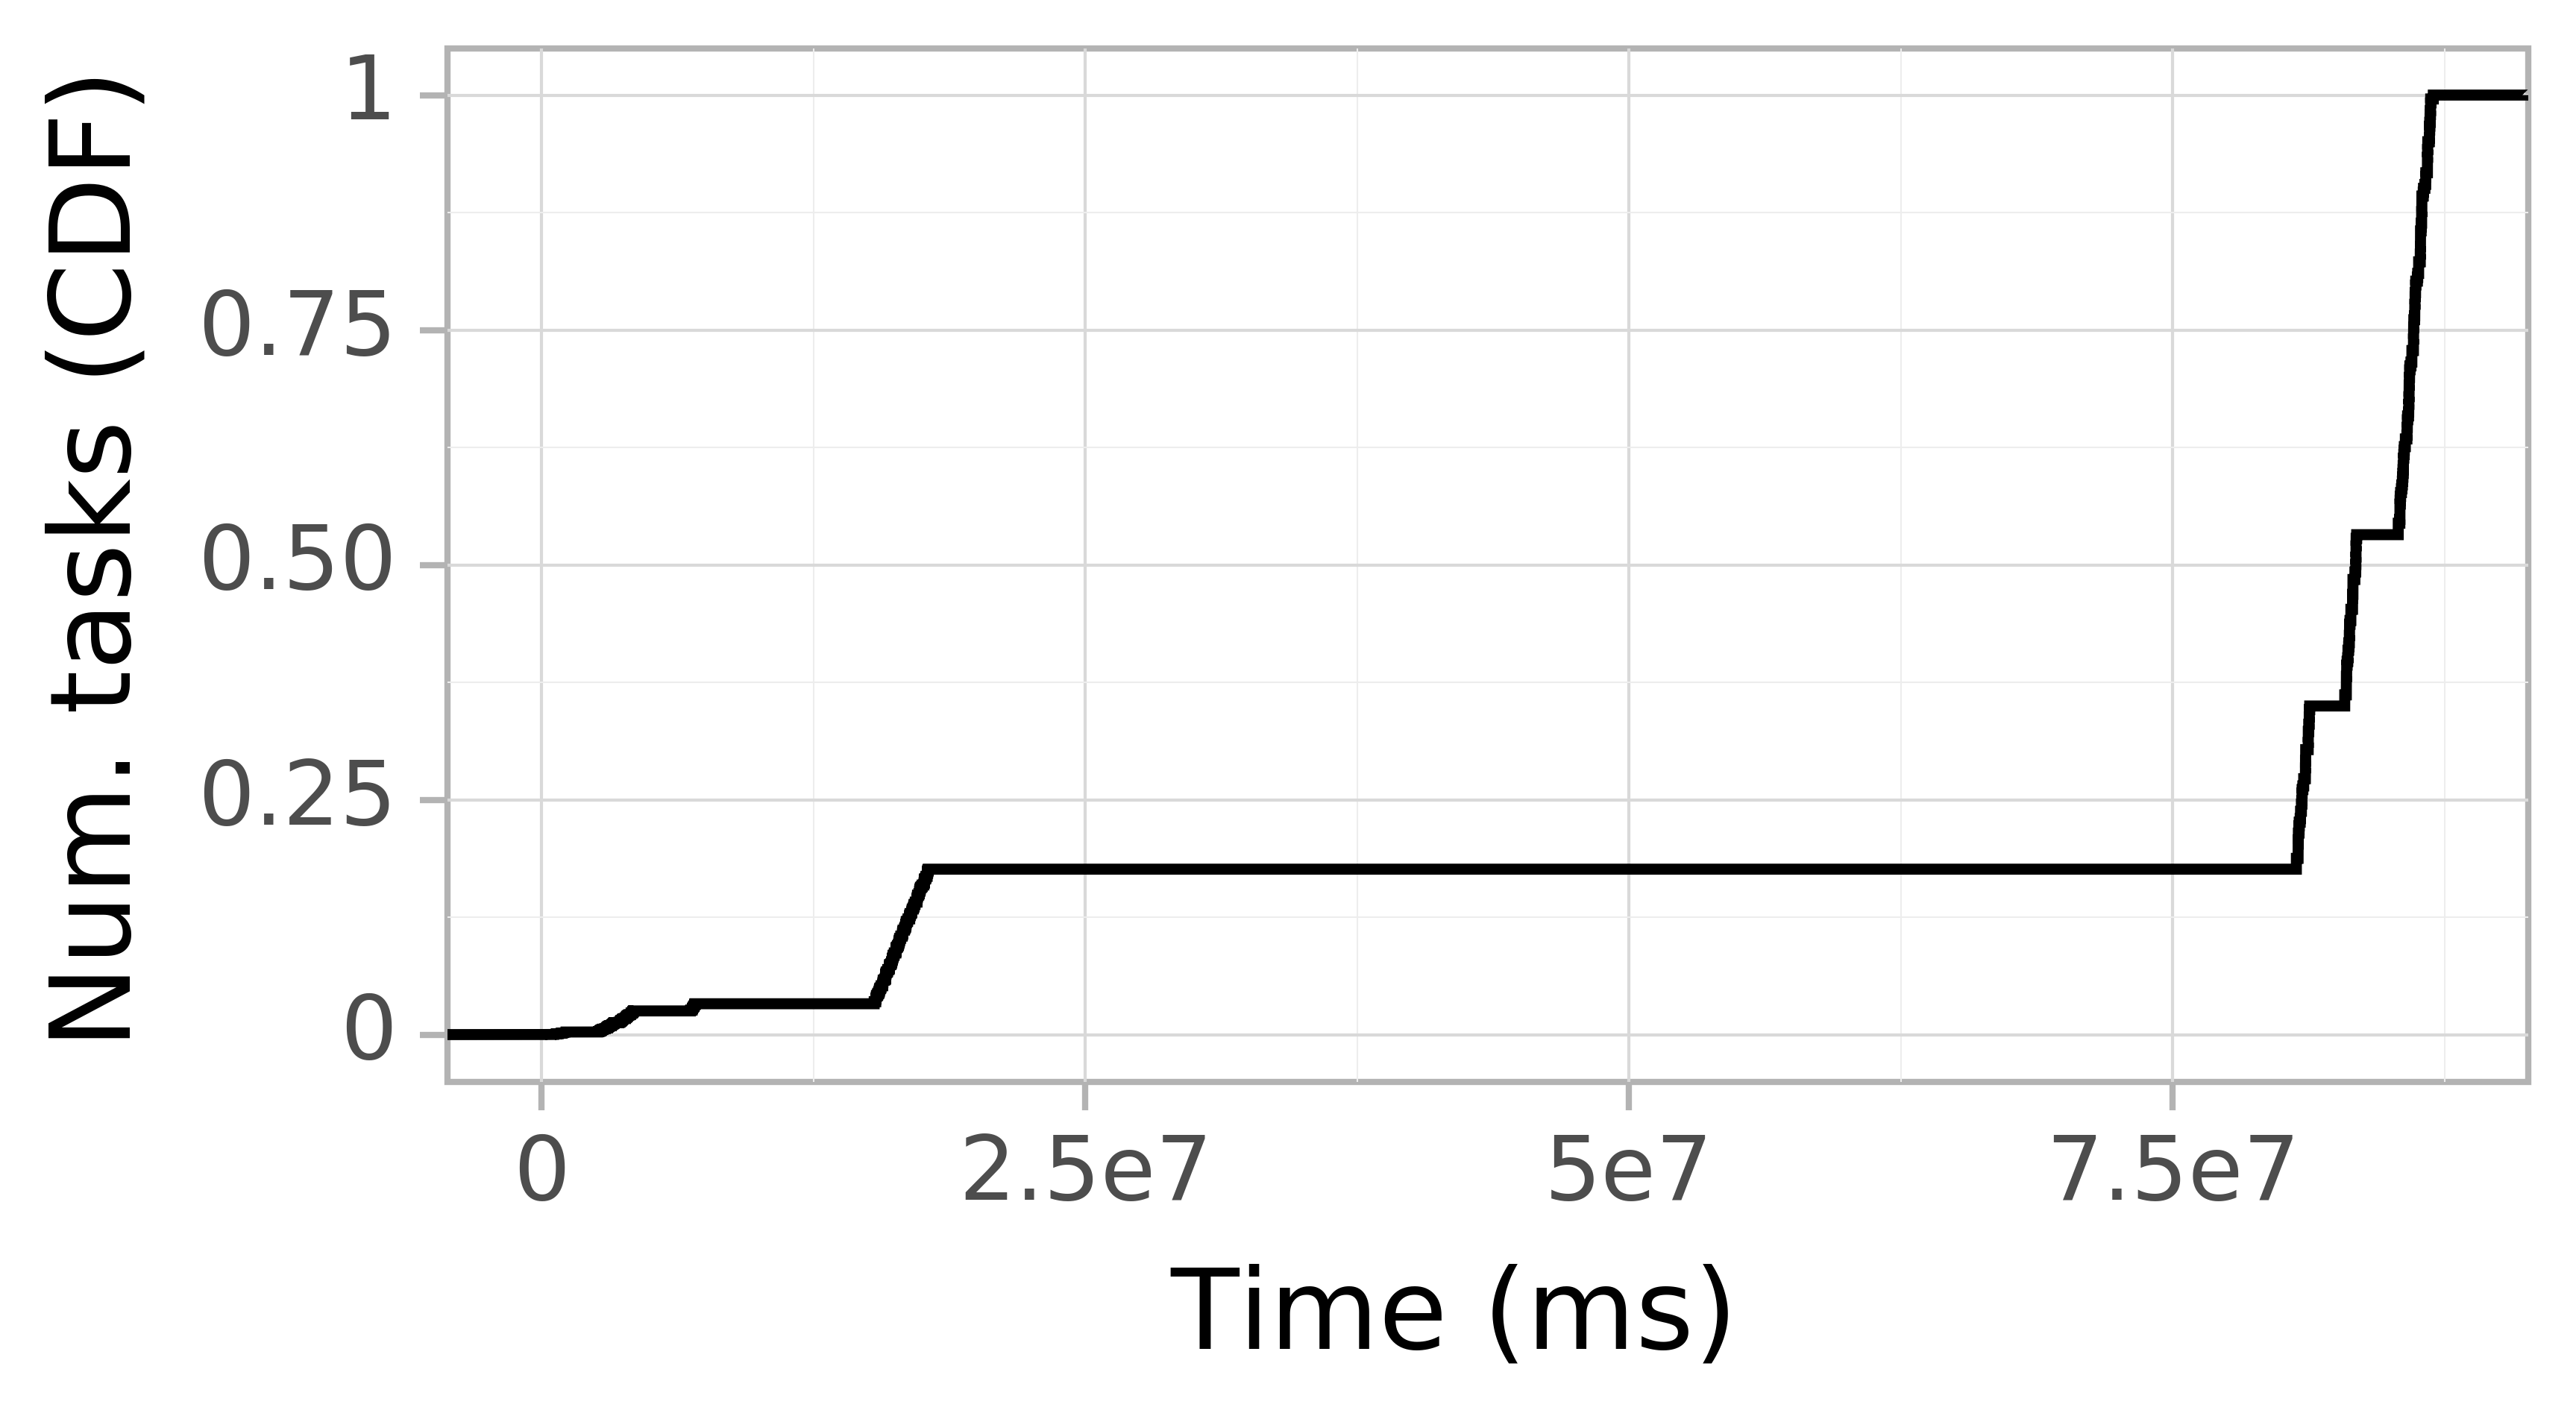 Task arrival CDF graph for the askalon-new_ee66 trace.